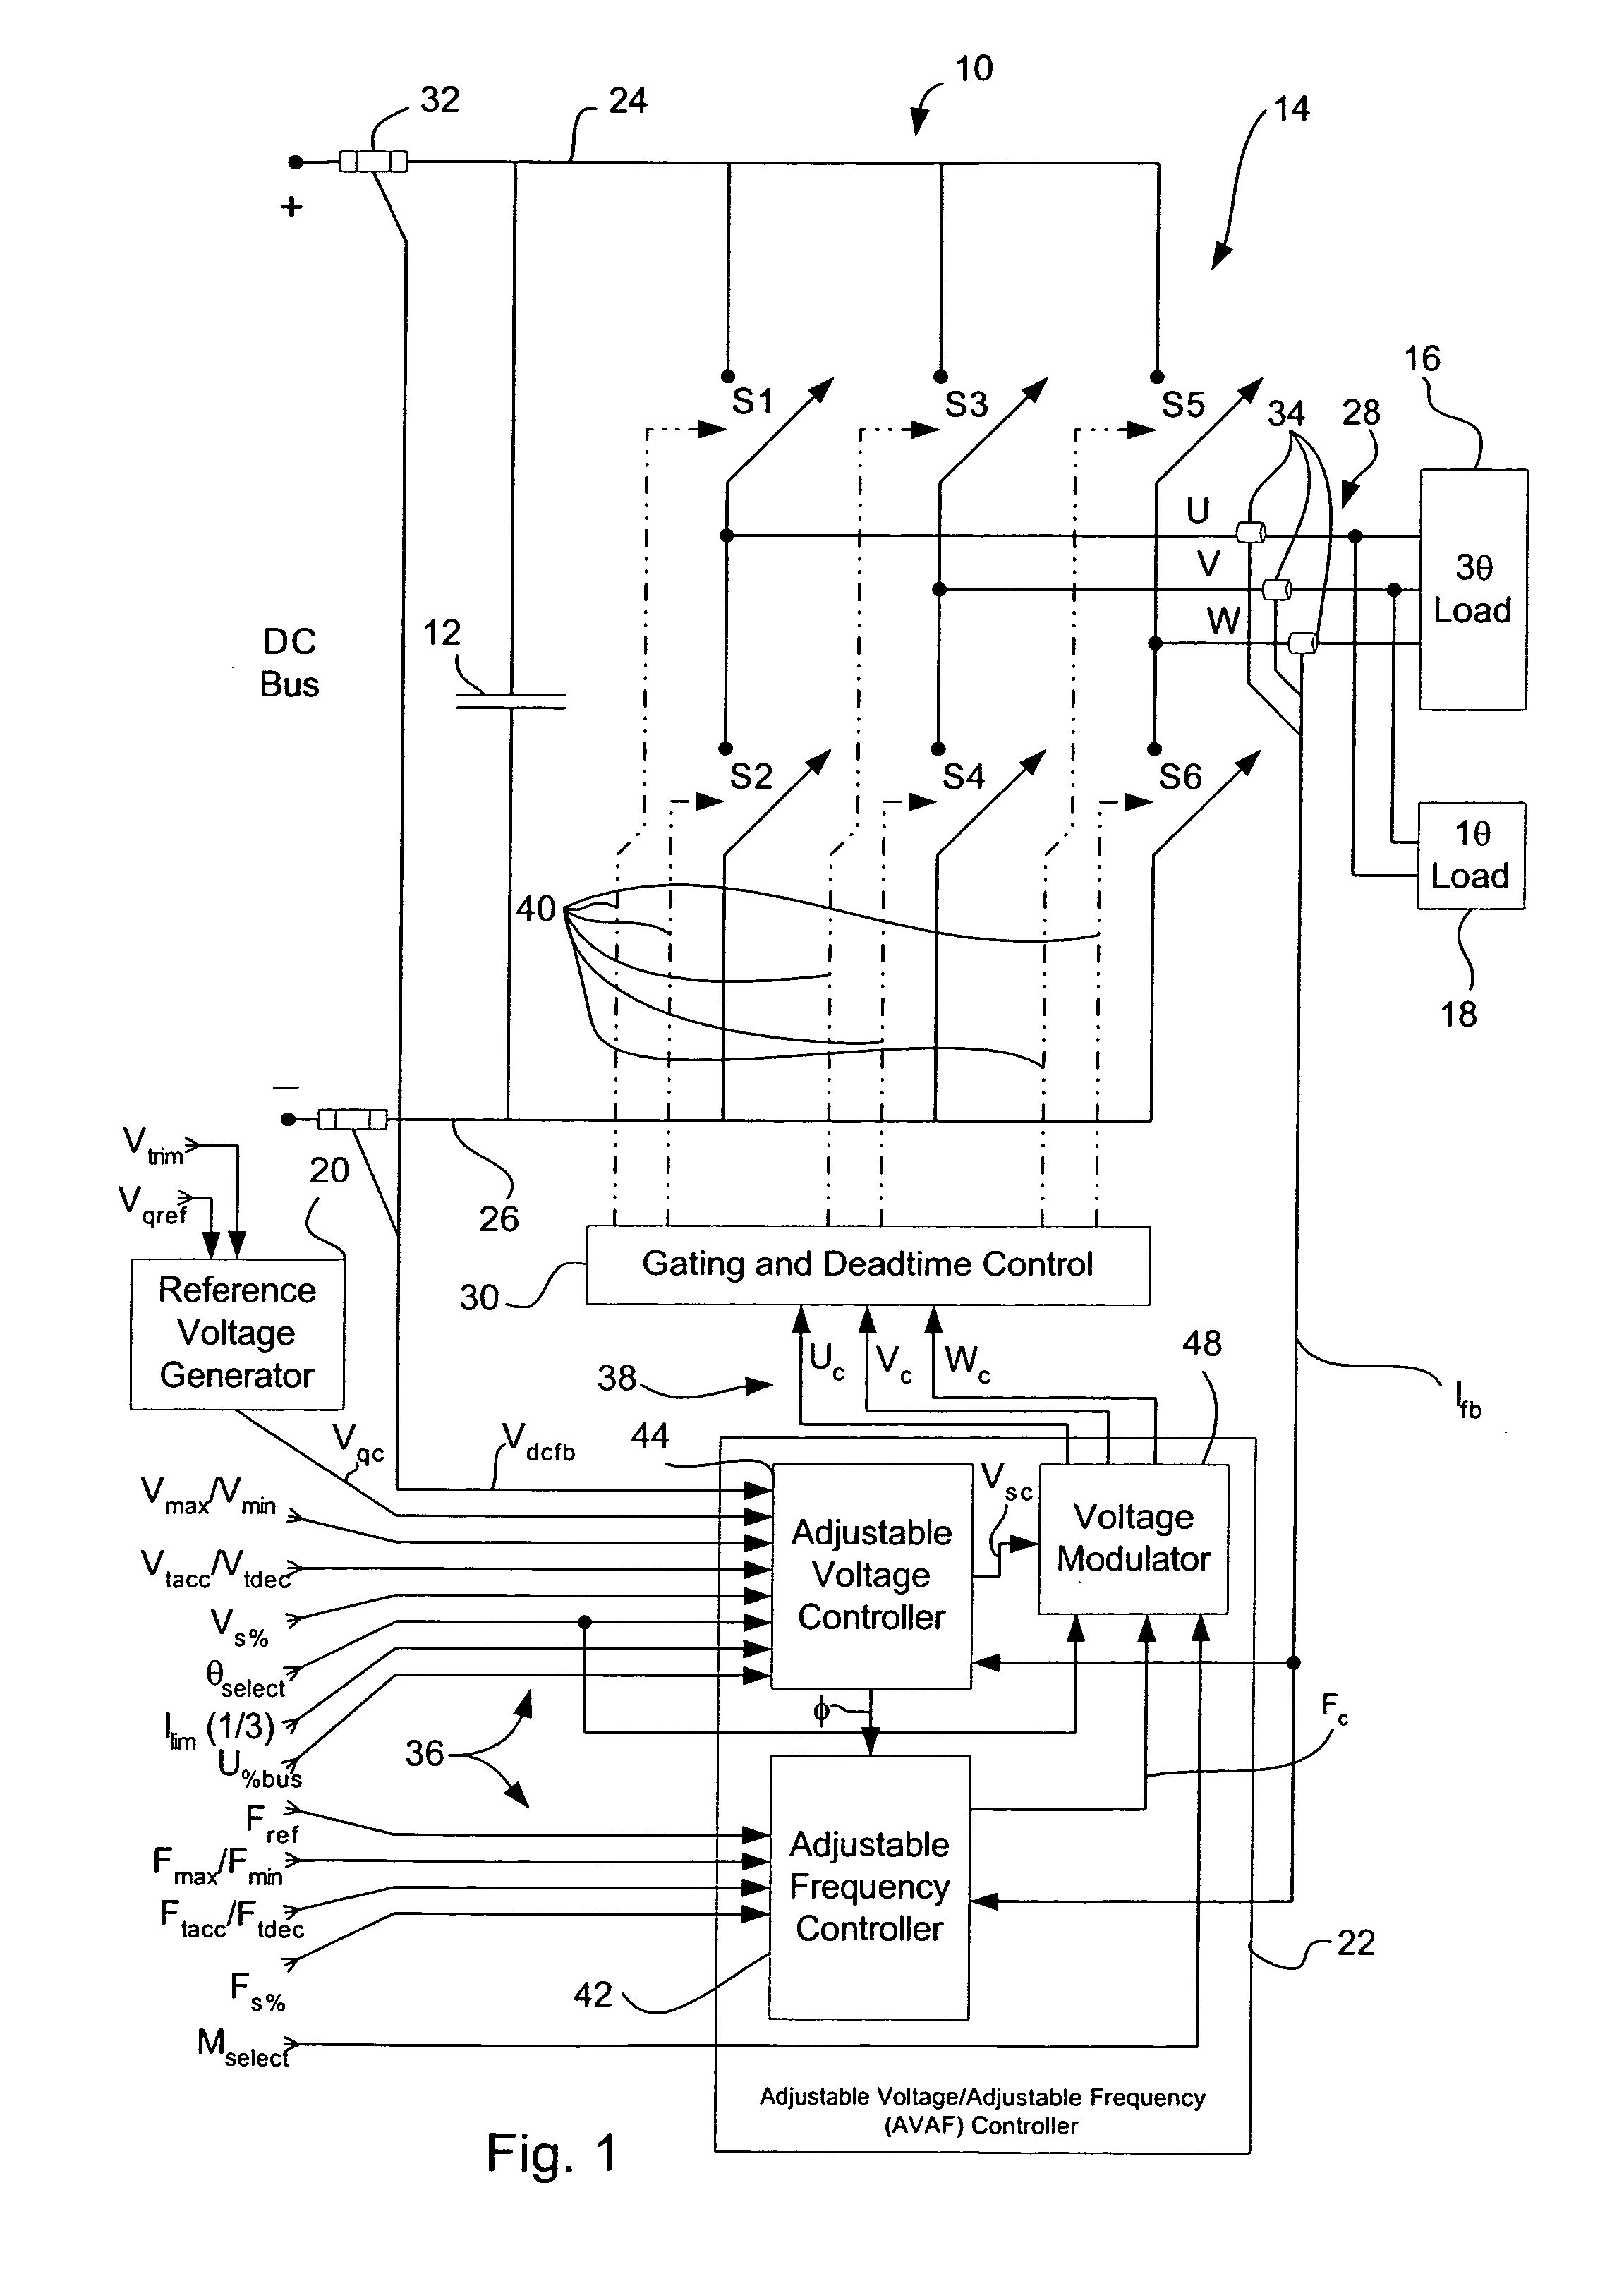 Method and apparatus for adjustable voltage/adjustable frequency inverter control